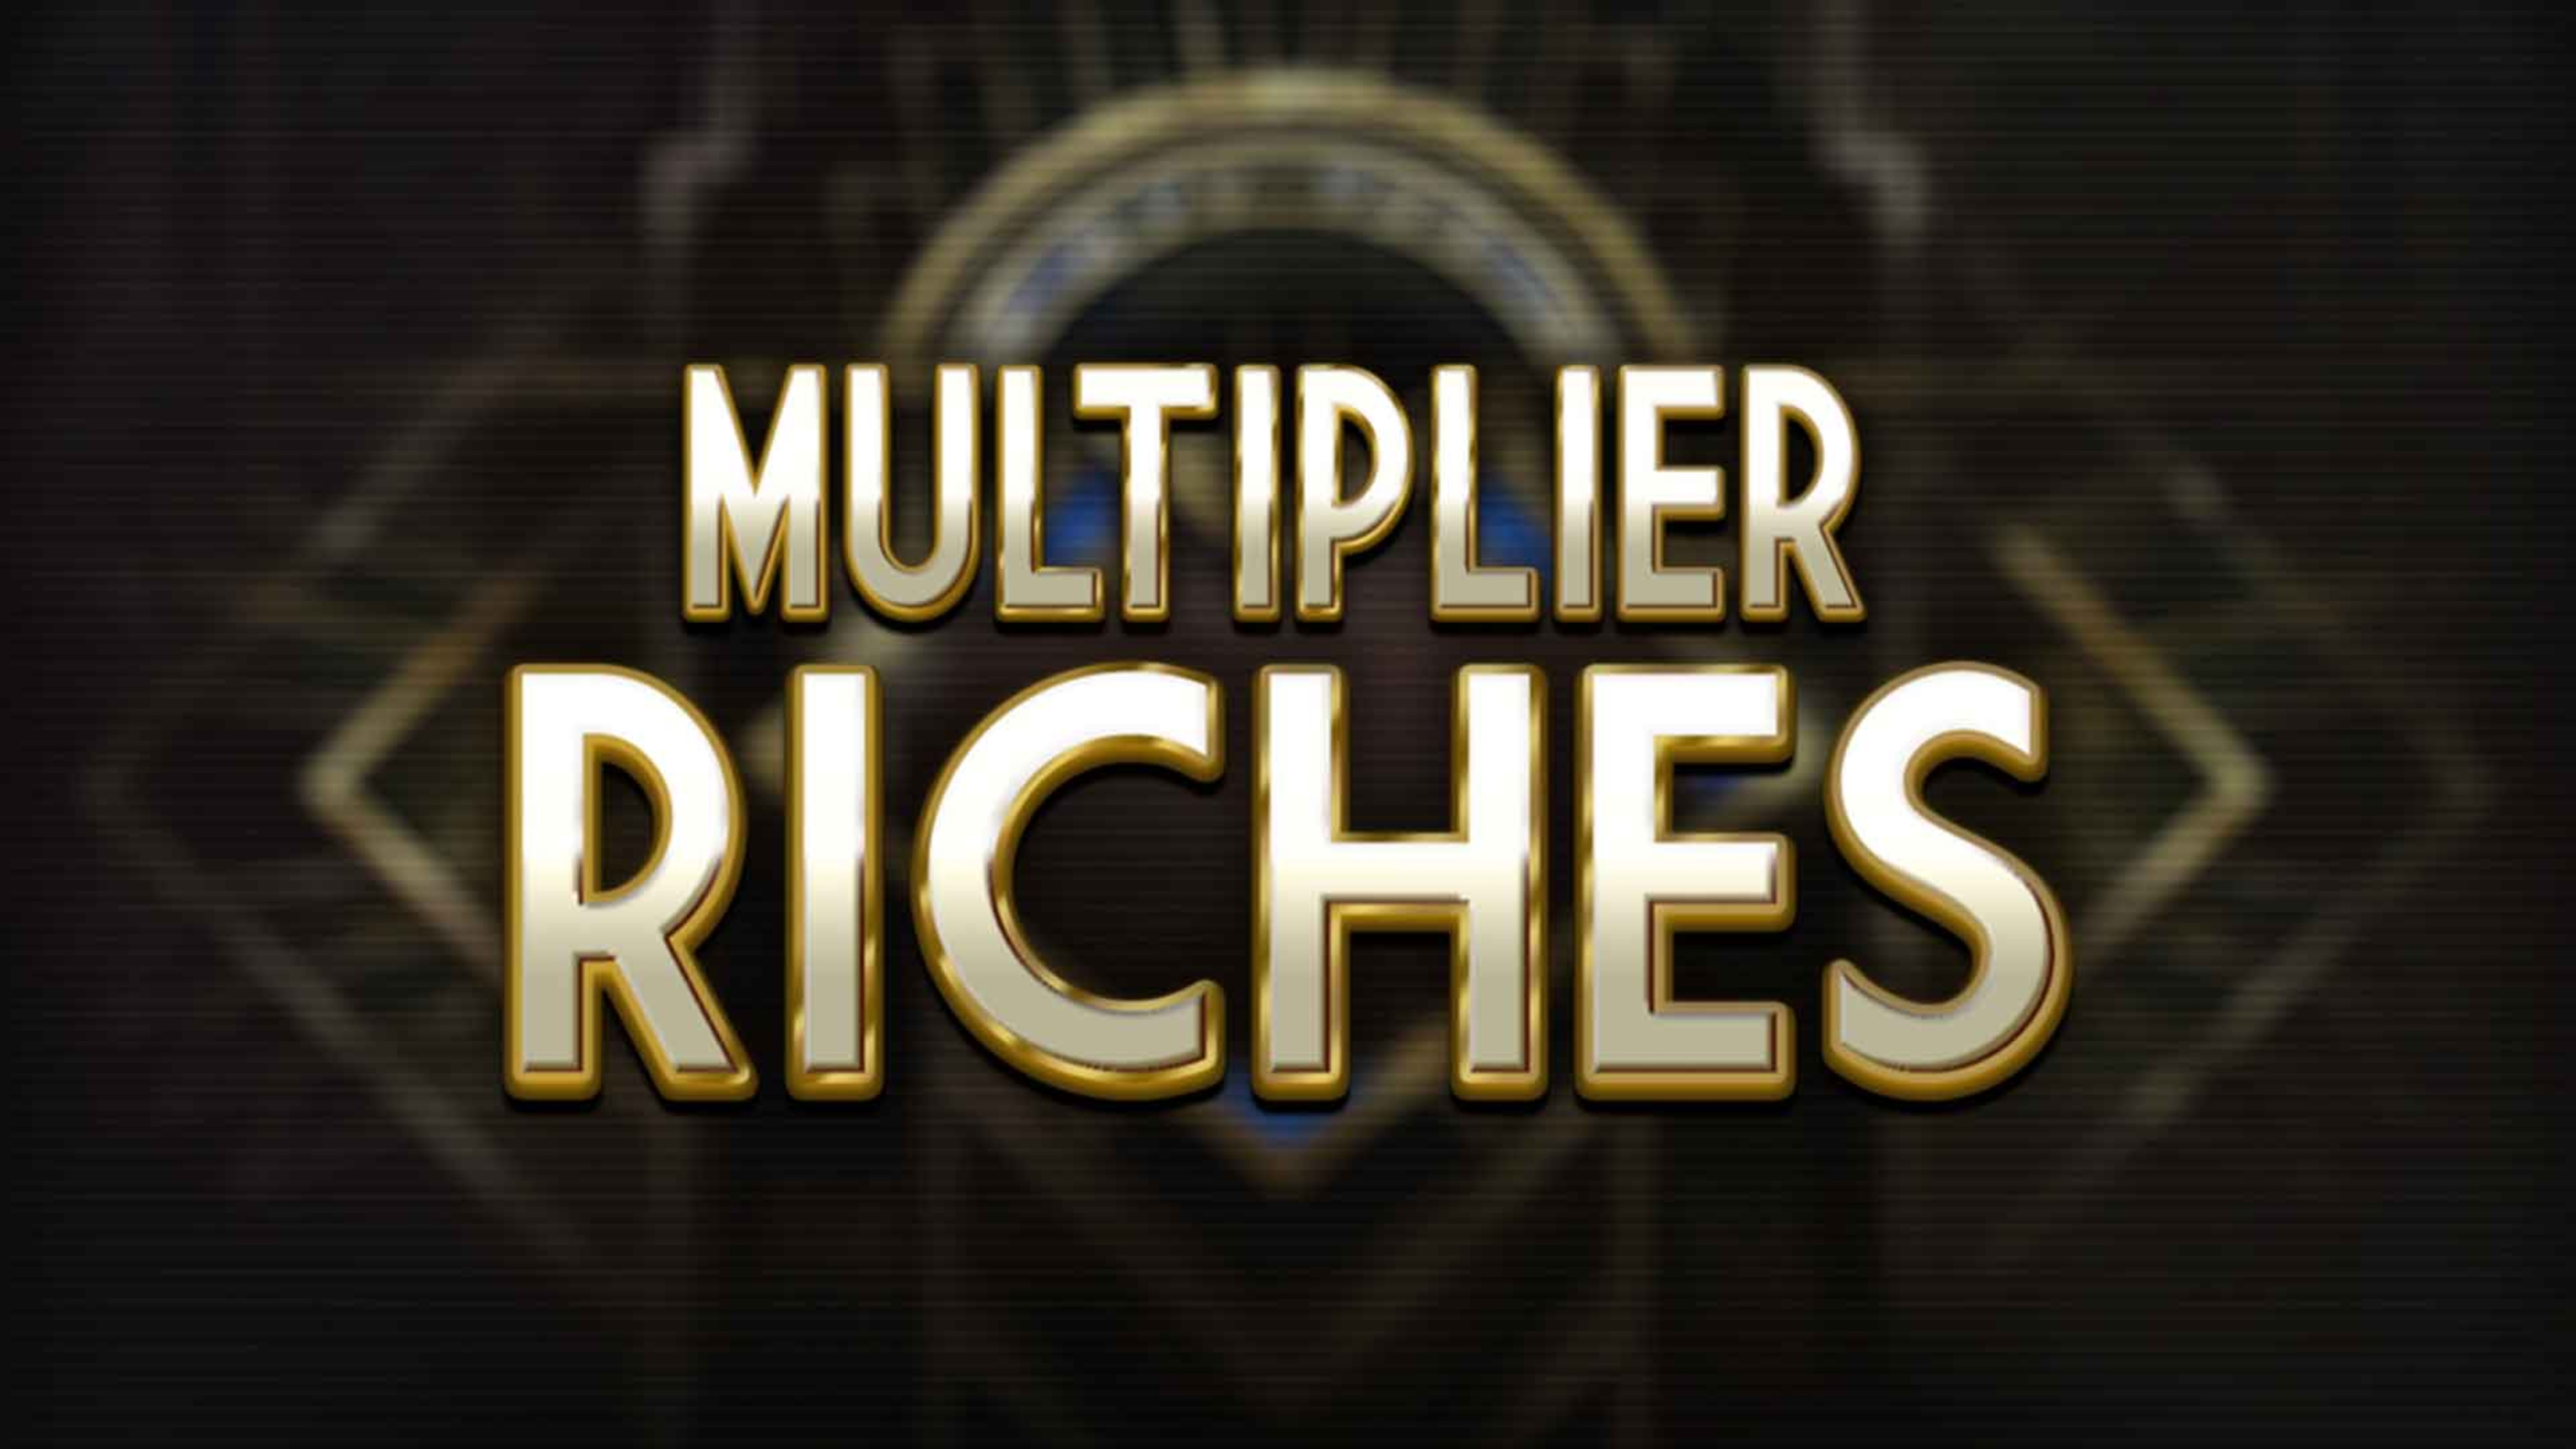 The Multiplier Riches Online Slot Demo Game by Red Tiger Gaming